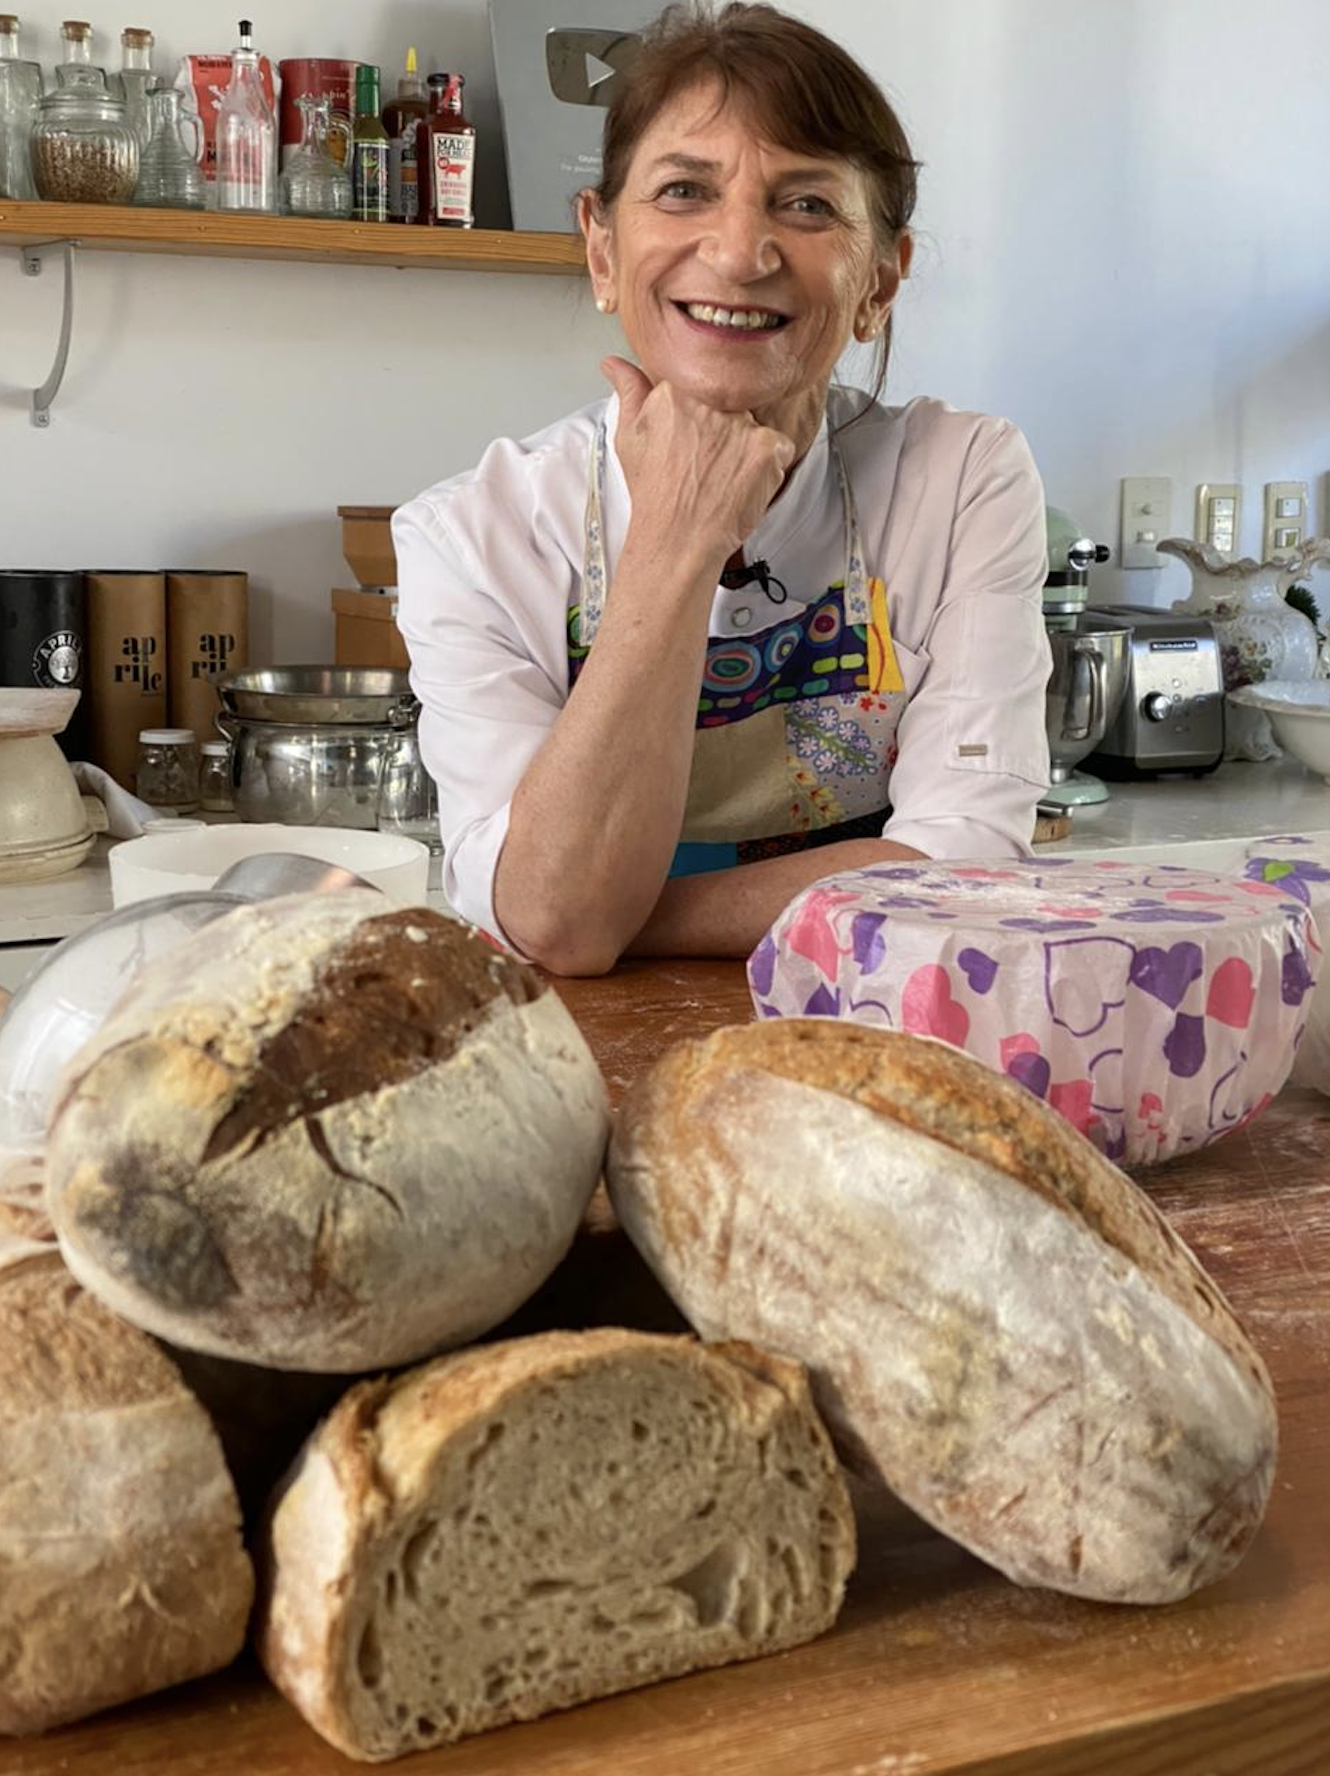 interview with Mariana Koppmann biochemist author sourdough bread scientist based in buenos aires argentina south america follow her on instagram 8